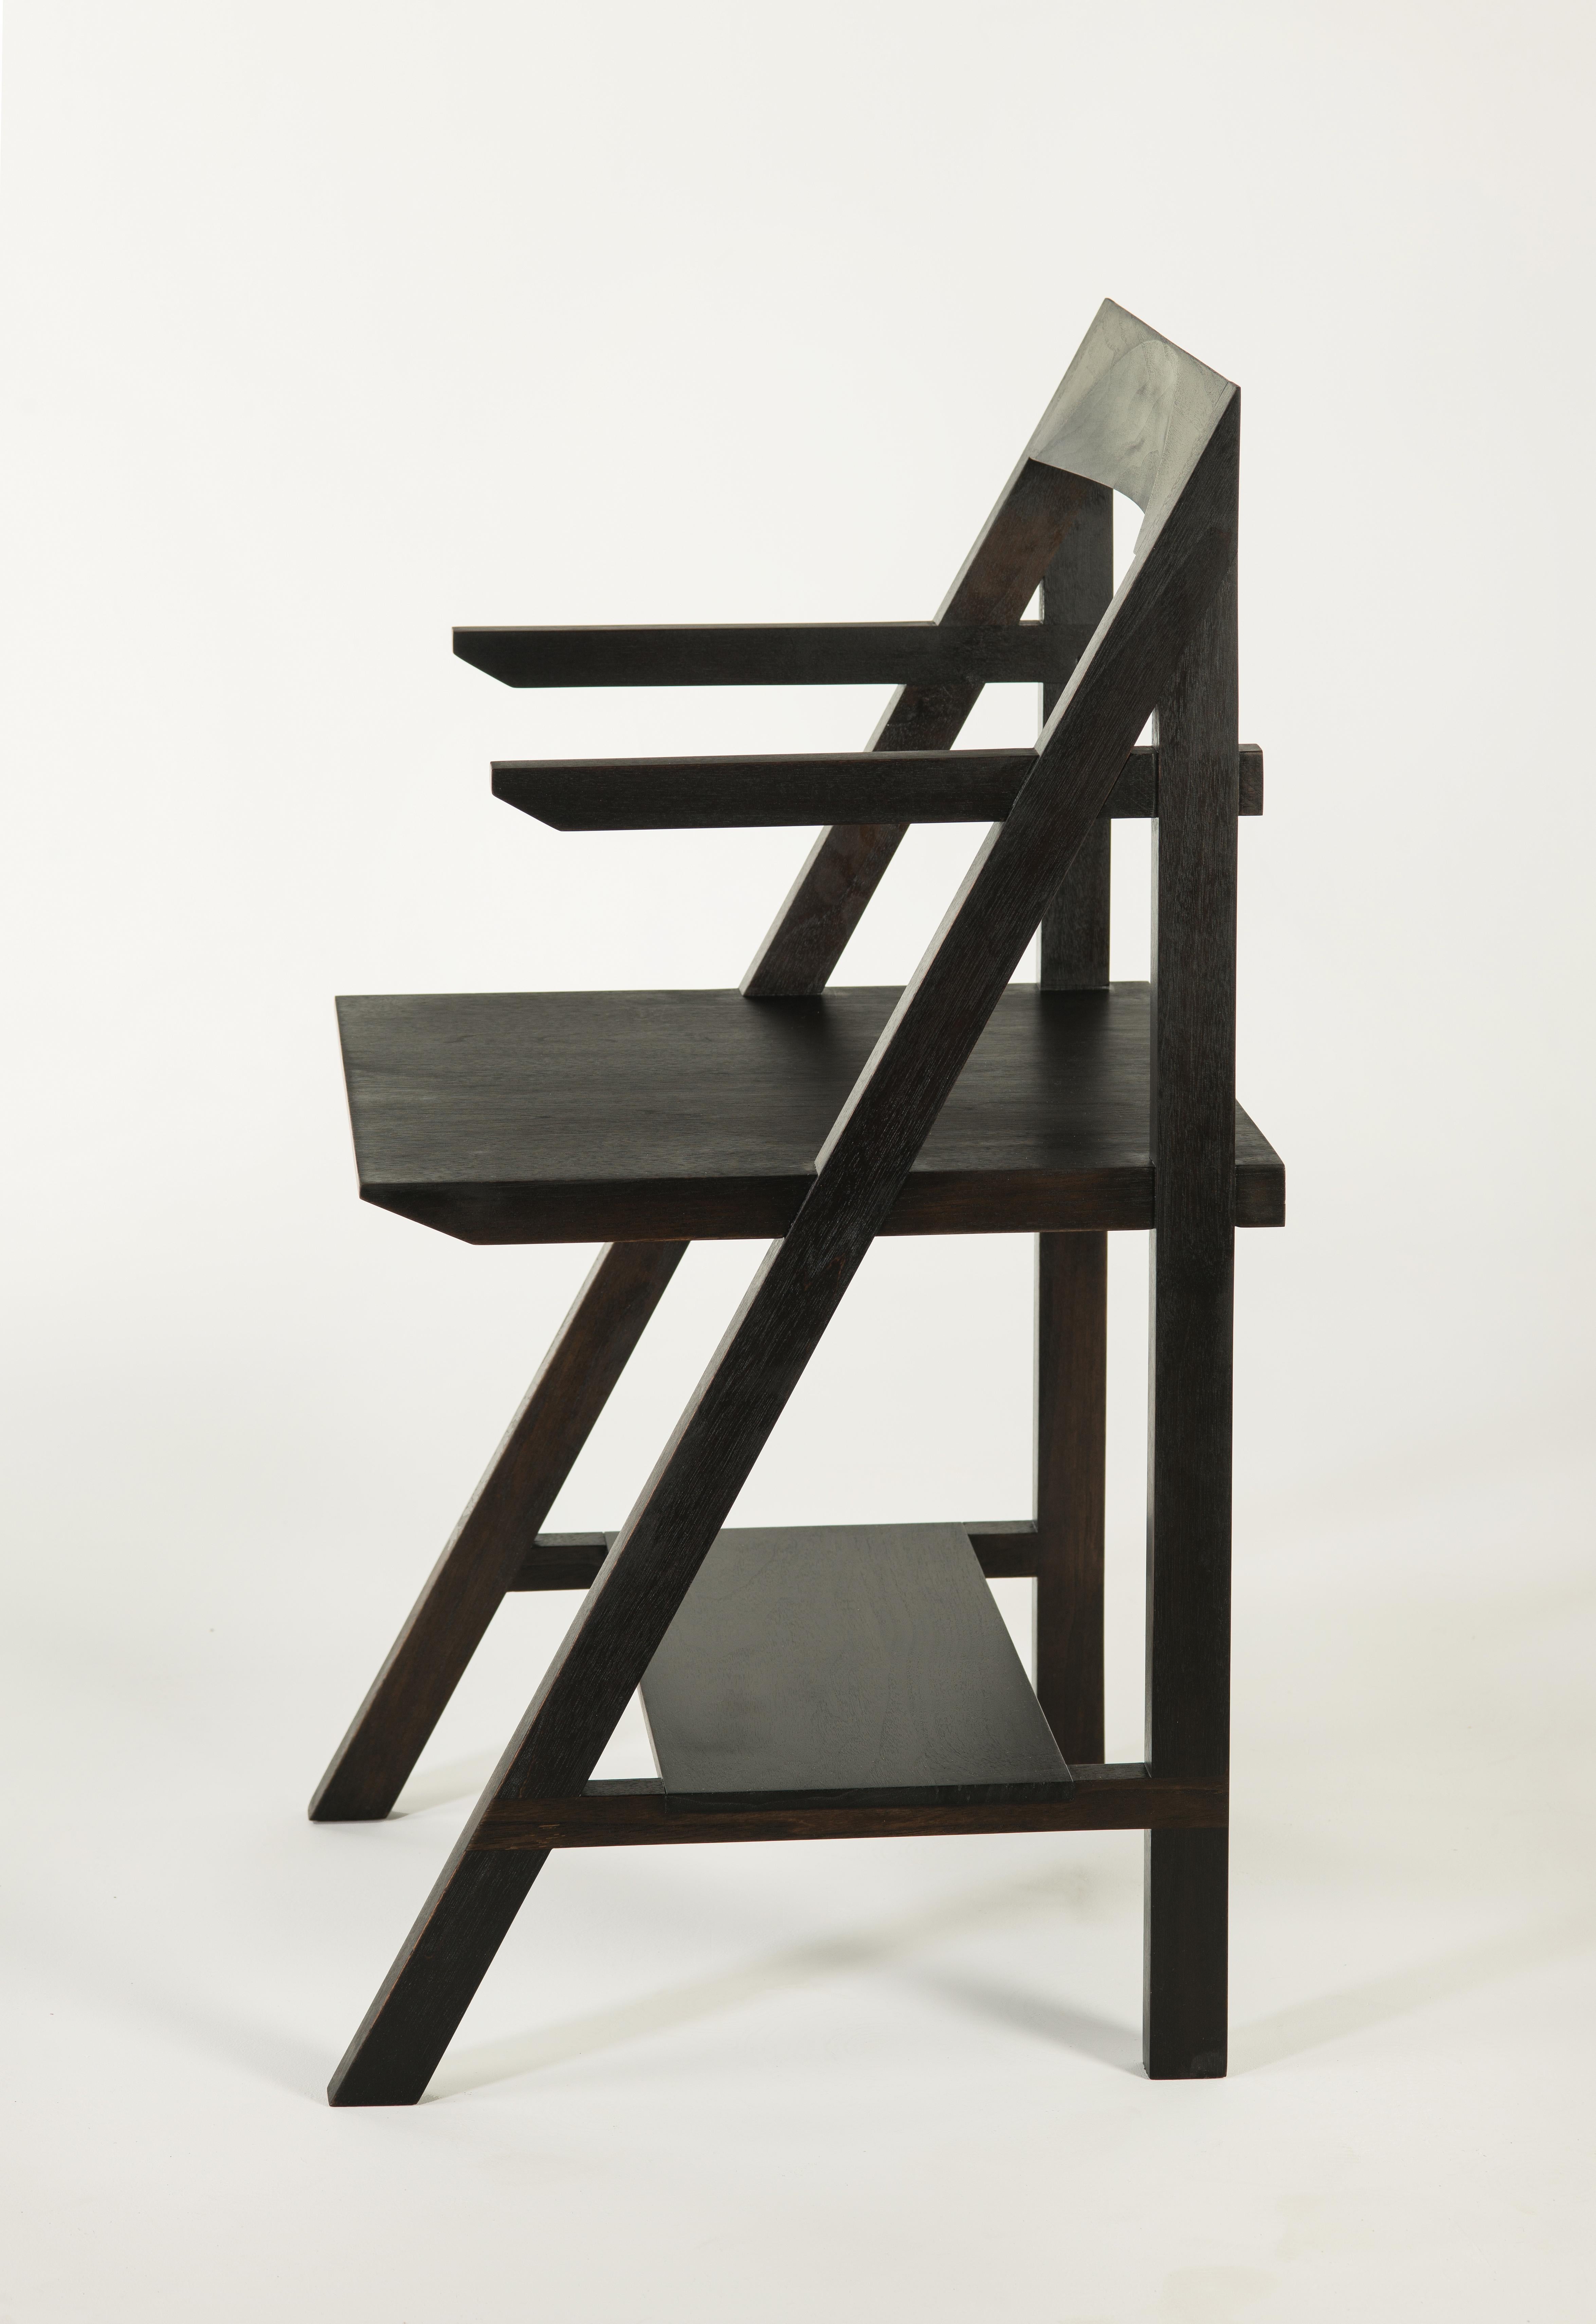 Walnut Cantilever Armchair by Phaedo
Dimensions: H 35” x D 18-1/2” x W 20-3/4” inches
Materials: Oxidized Black Walnut 

The Cantilever Chair is a true blend of form and function, the shelf below provides a practical means of storage without